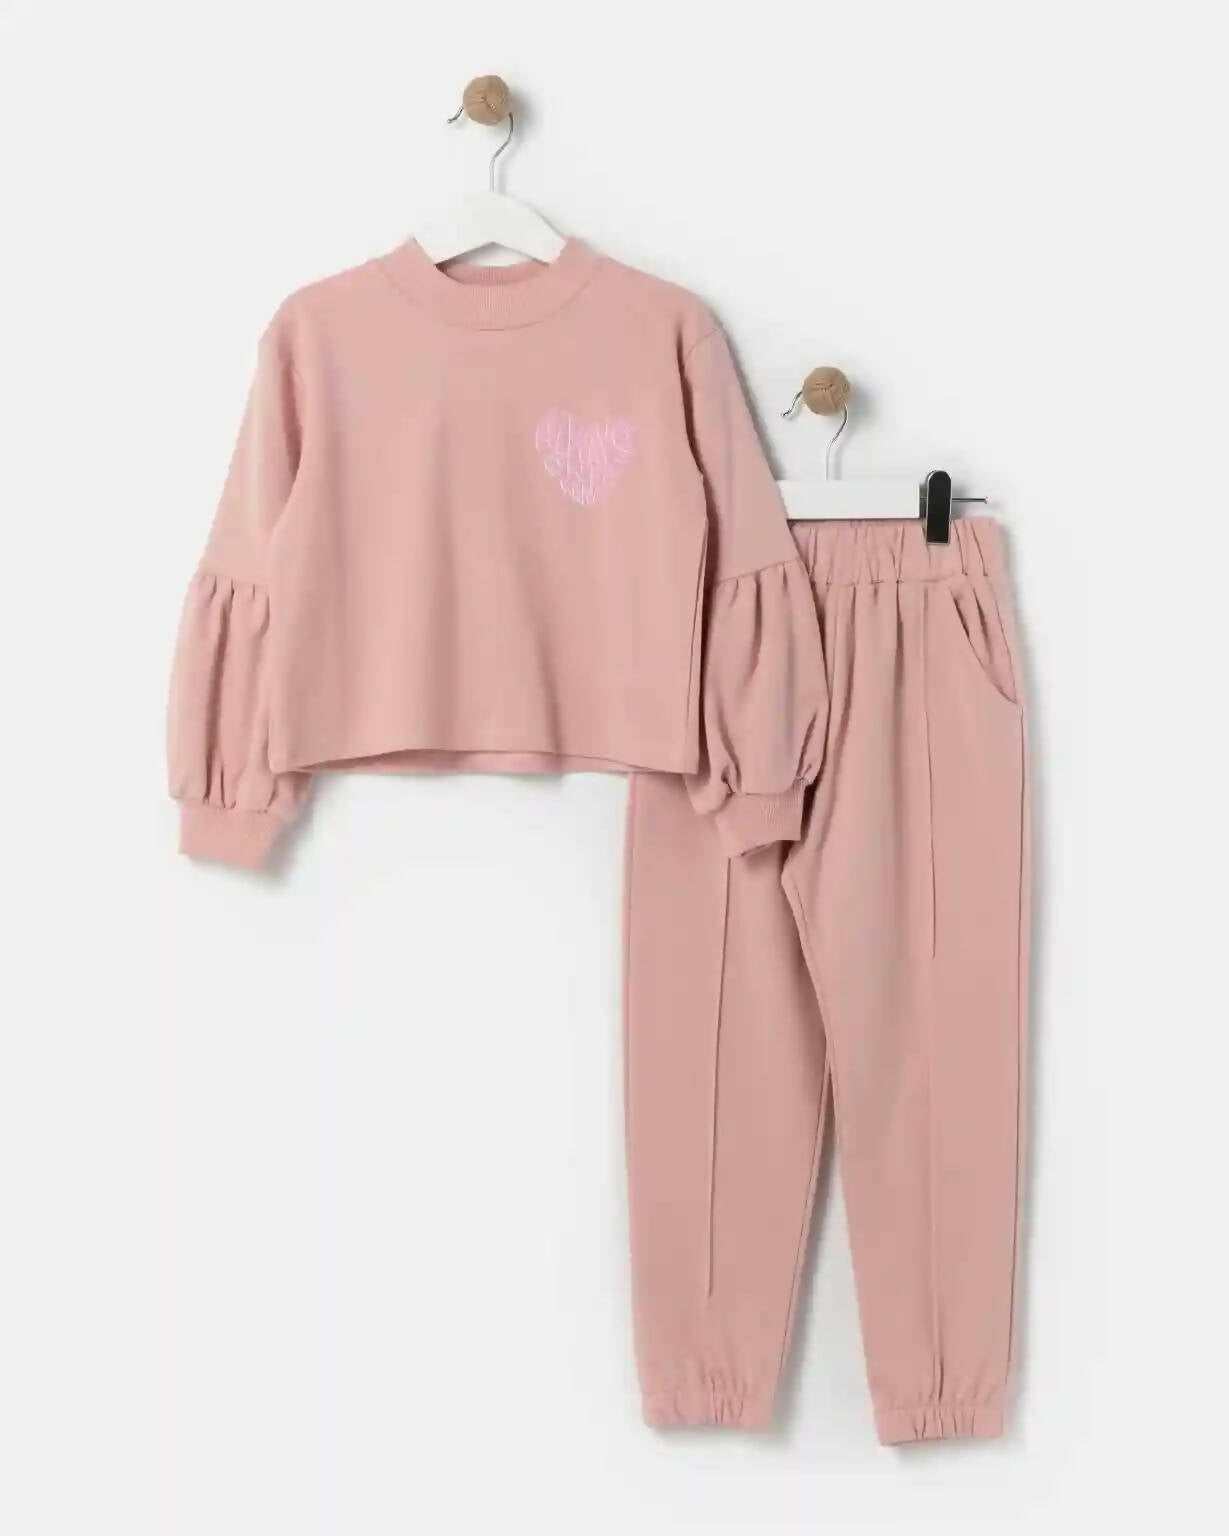 "Girls Always On My Mind" outfit in pink